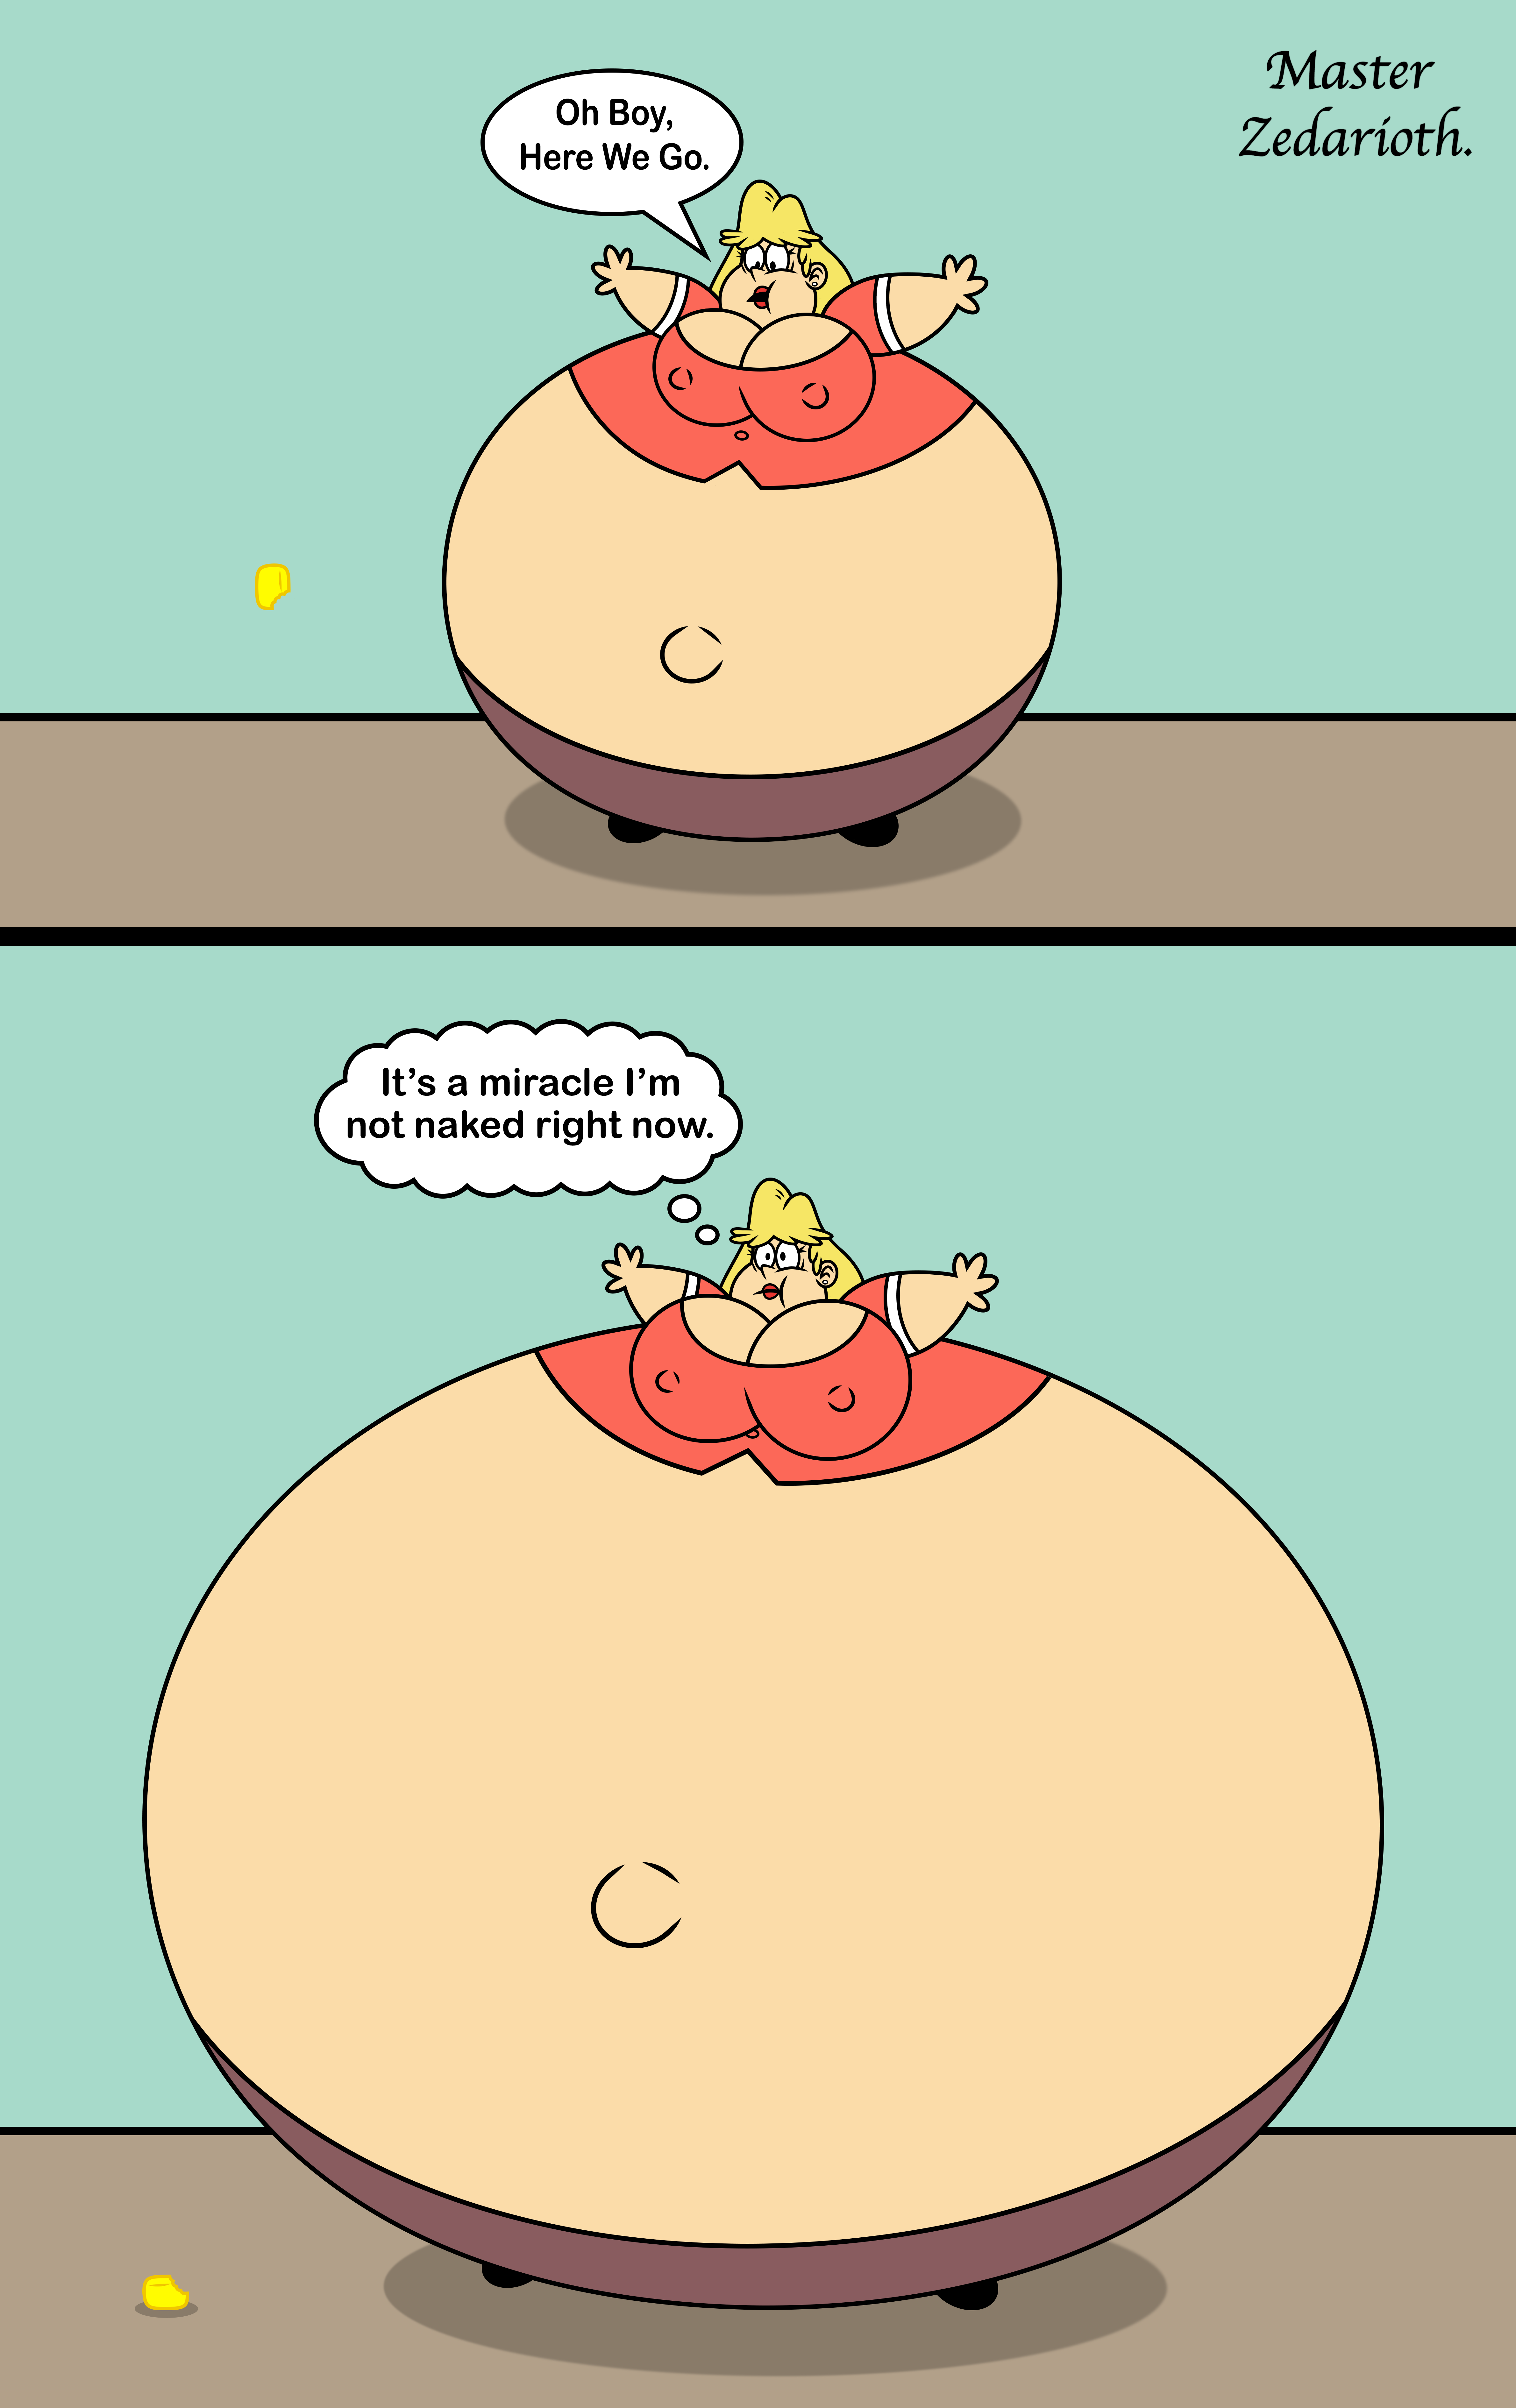 rita loud, the loud house, thought bubble, belly expansion, body inflation, breast inflation, expansion, inflation, master zedarioth, milf, sphere, 